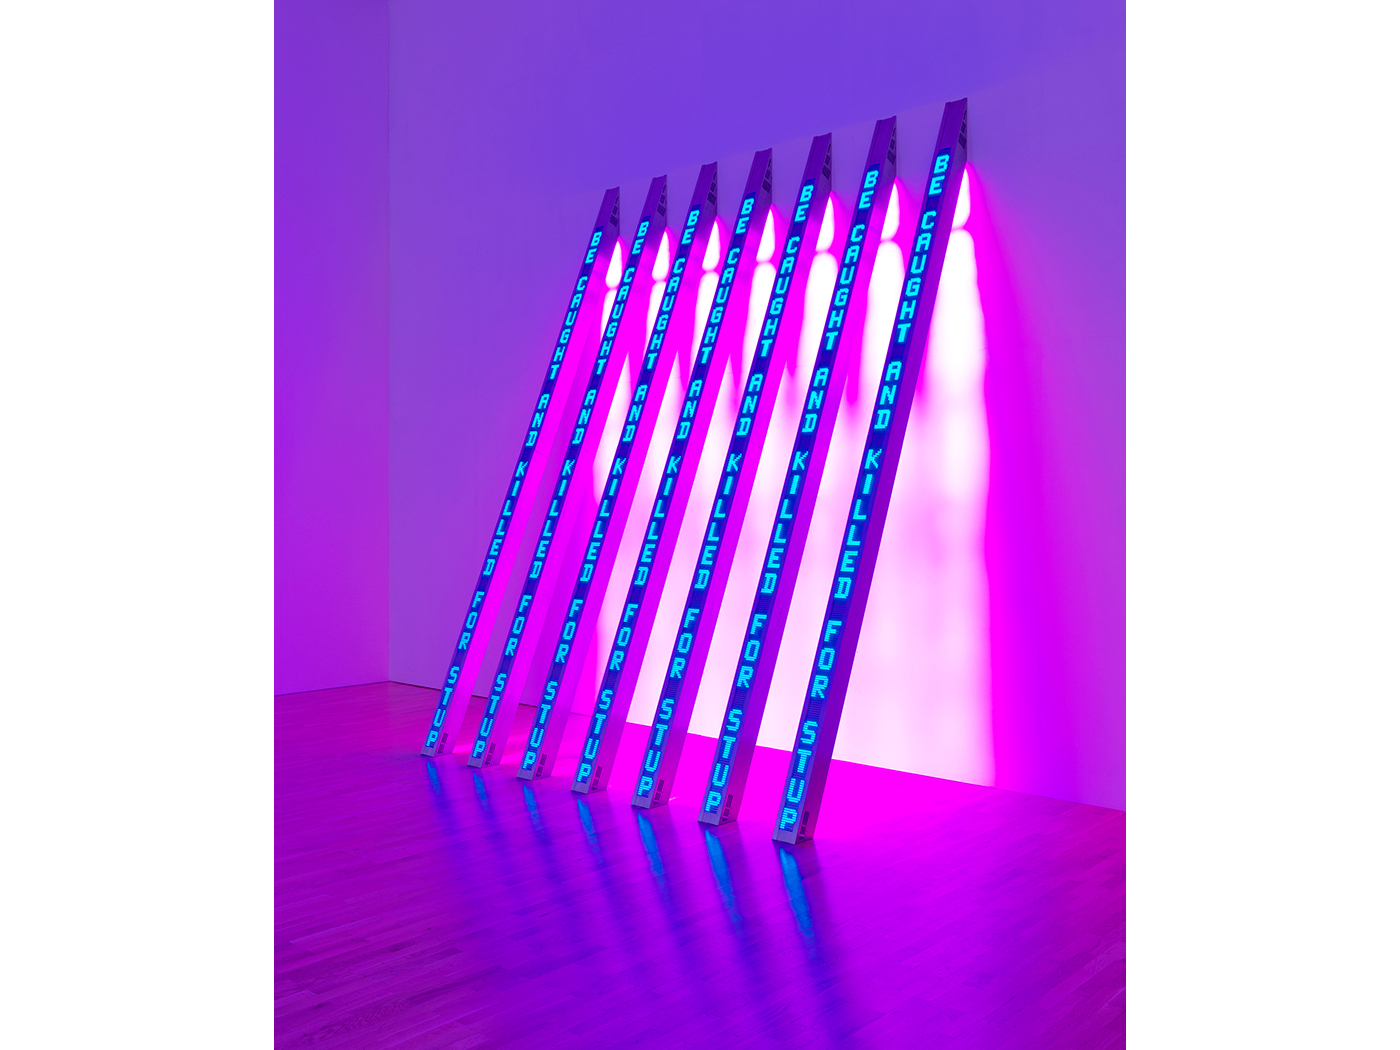 BLUE PURPLE TILT (2007) installed in the ARTIST ROOMS at Tate Modern, London, 2018. The LED texts are drawn from Holzer’s previous works, including  her iconic 'Truisms' (1977–9).